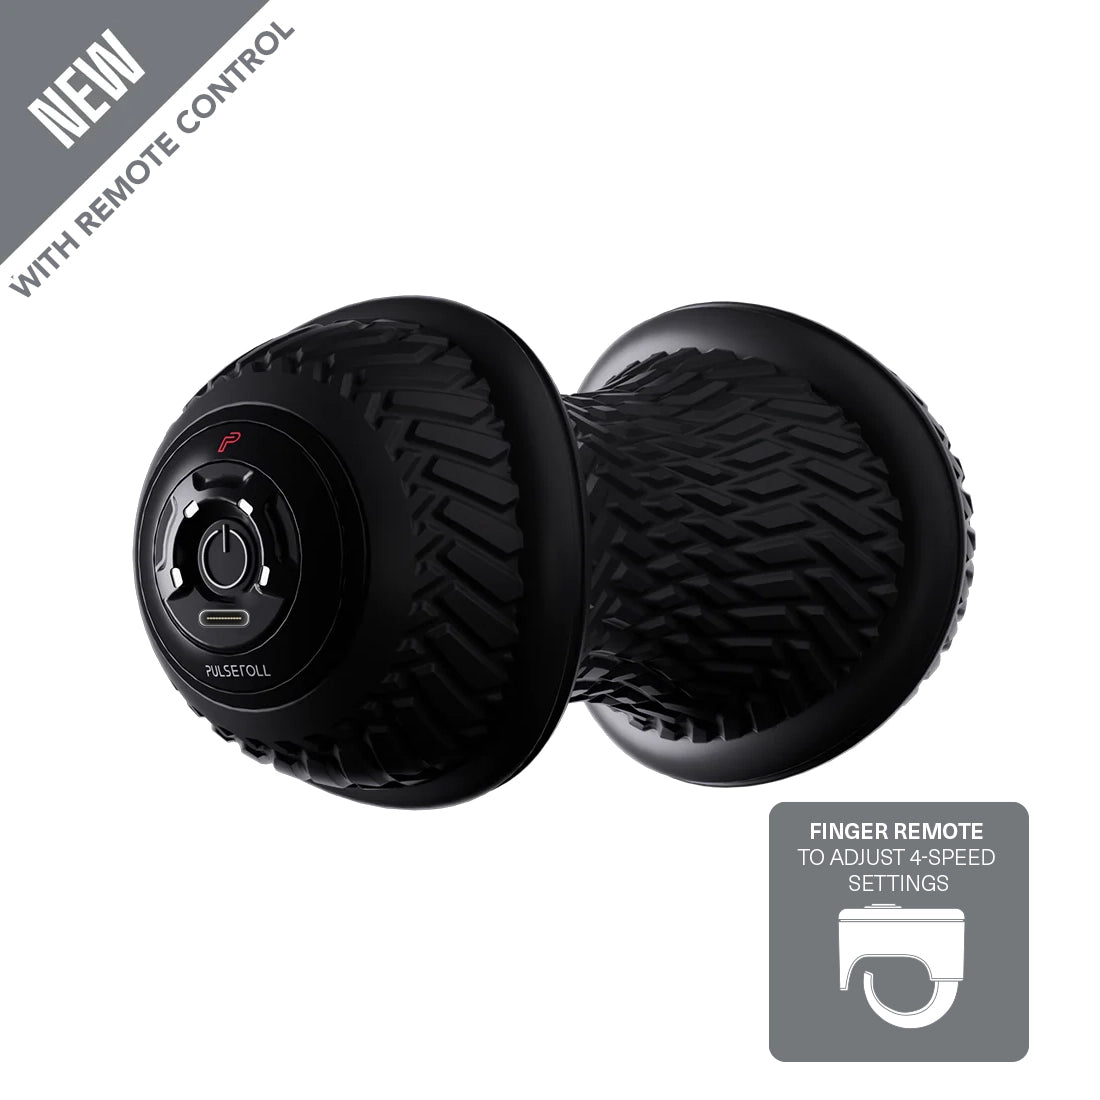 VYB Duo Roller - Pulseroll - Vibrating peanut ball - black colour - 4 speed settings - remote control